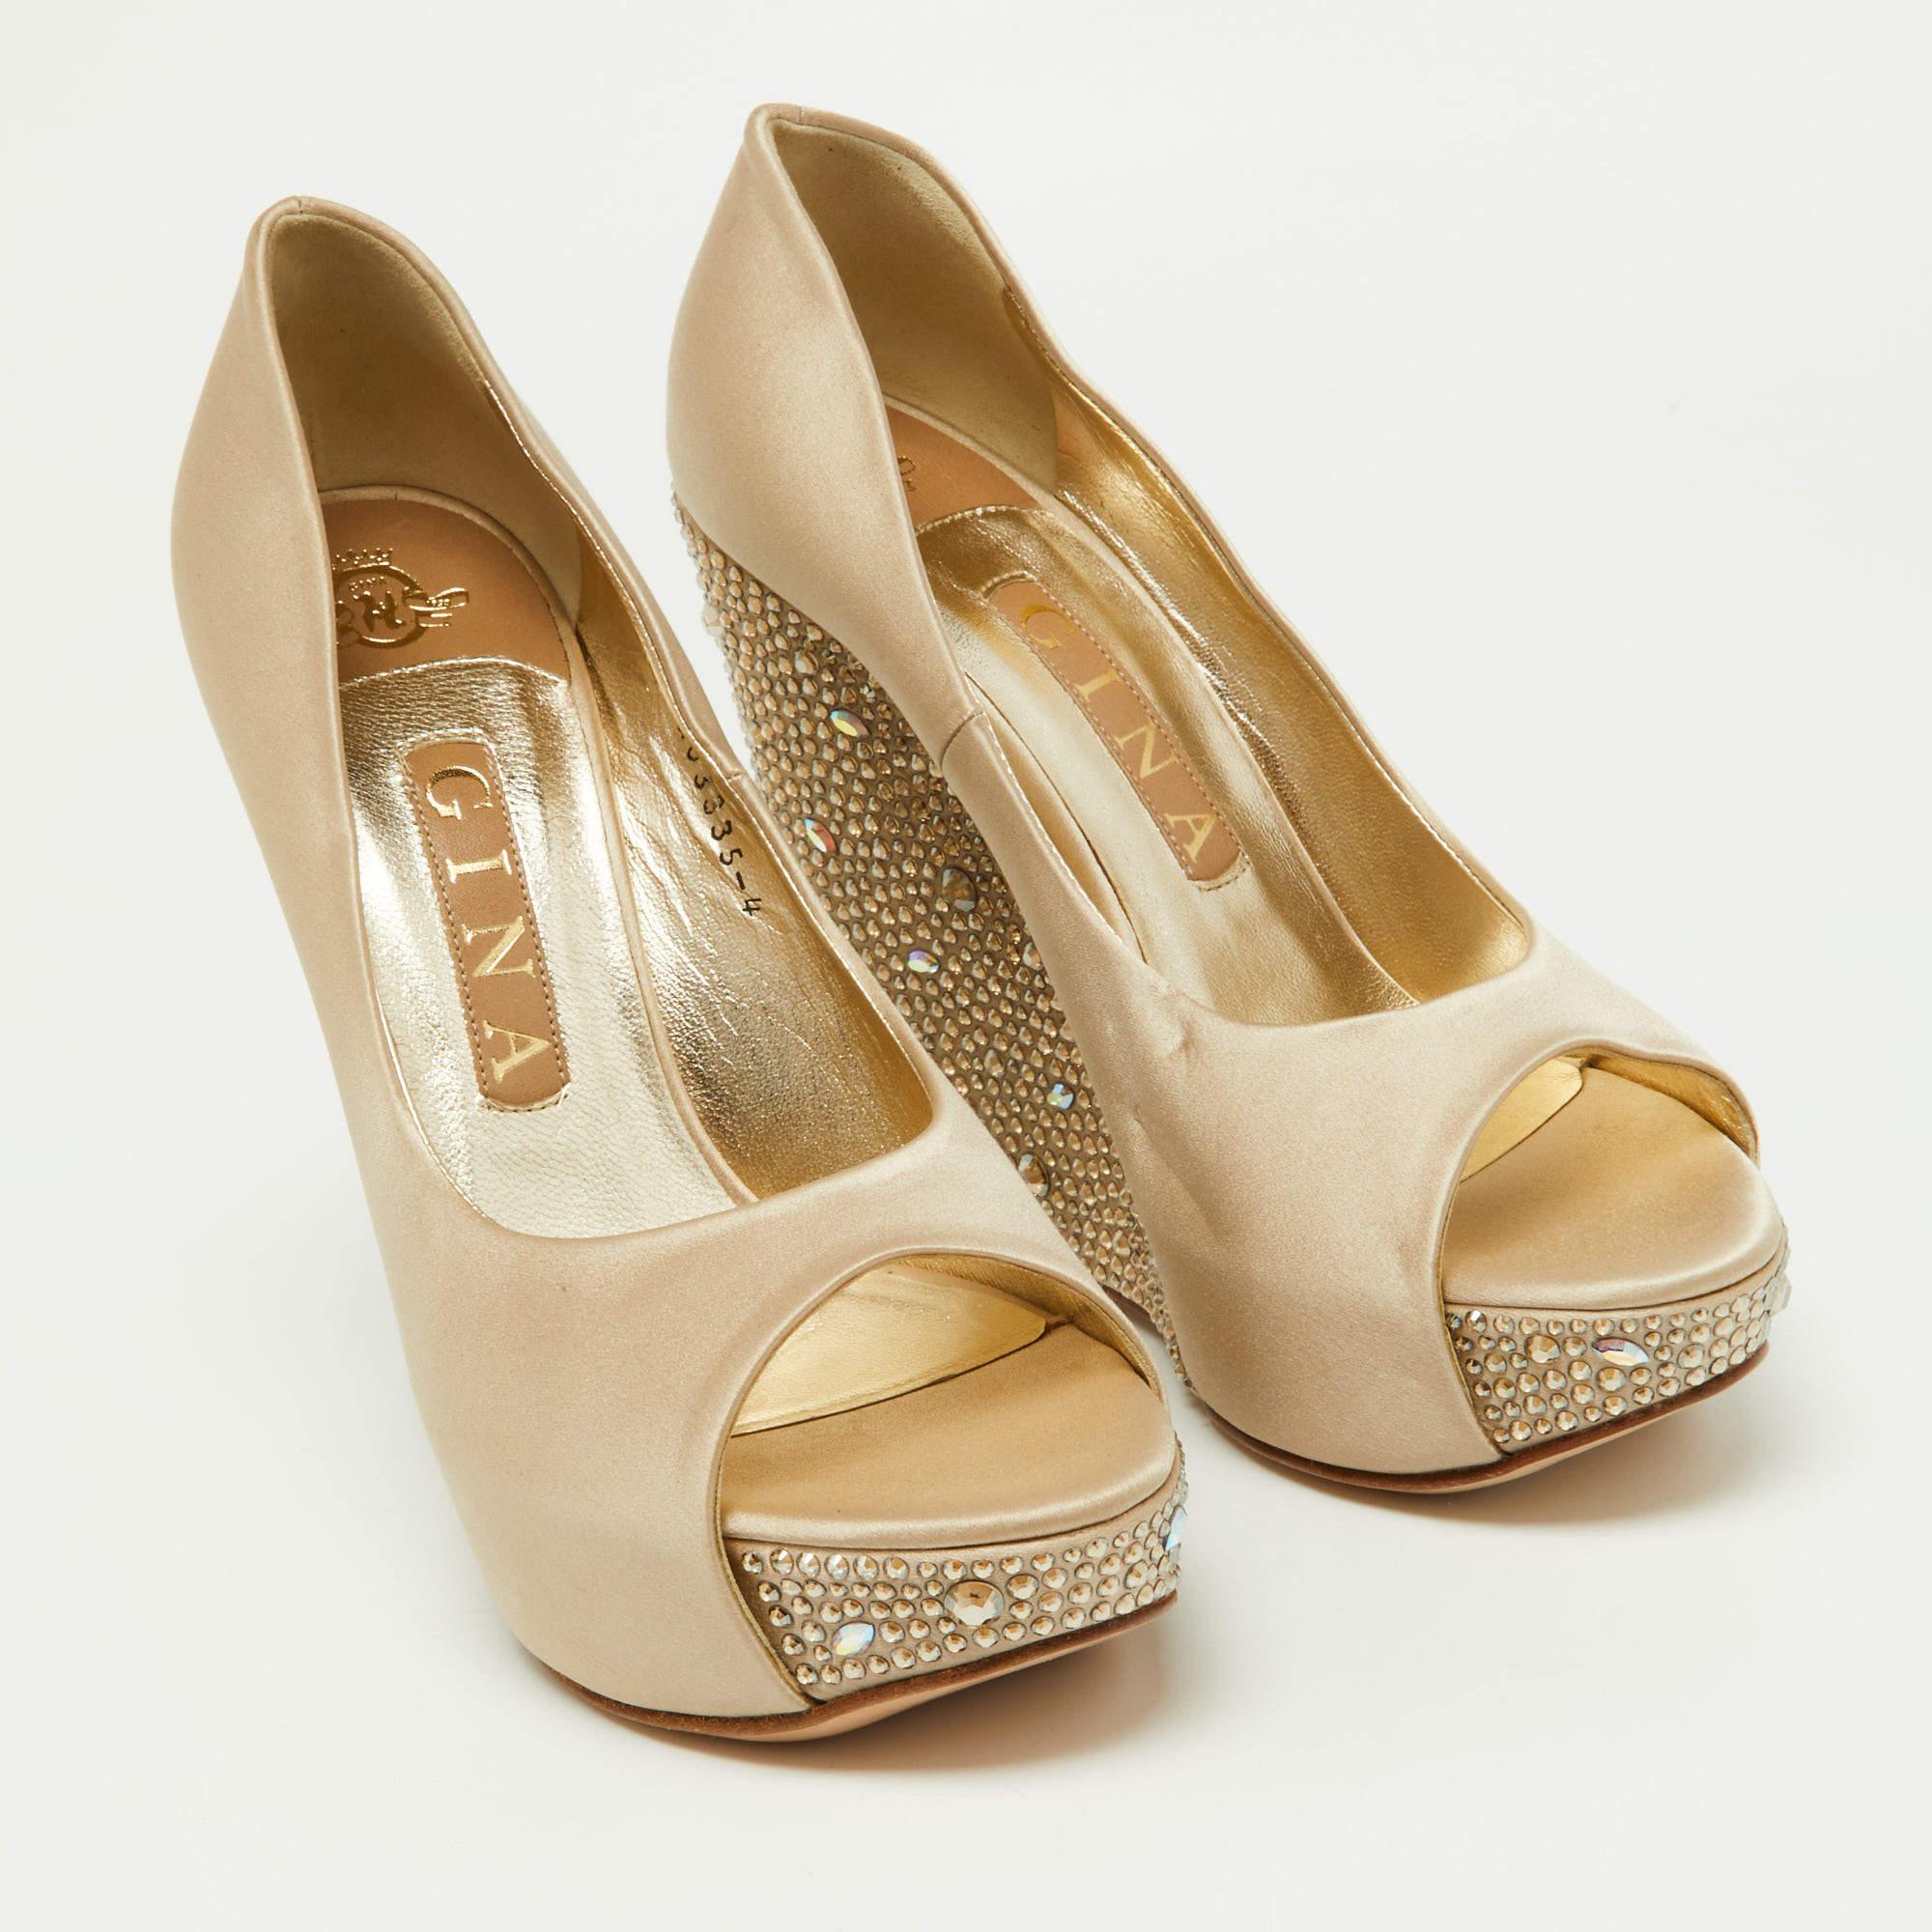 Gina Beige Crystal Embellished Satin Belle Open Toe Wedge Pumps Size 37 In Excellent Condition For Sale In Dubai, Al Qouz 2